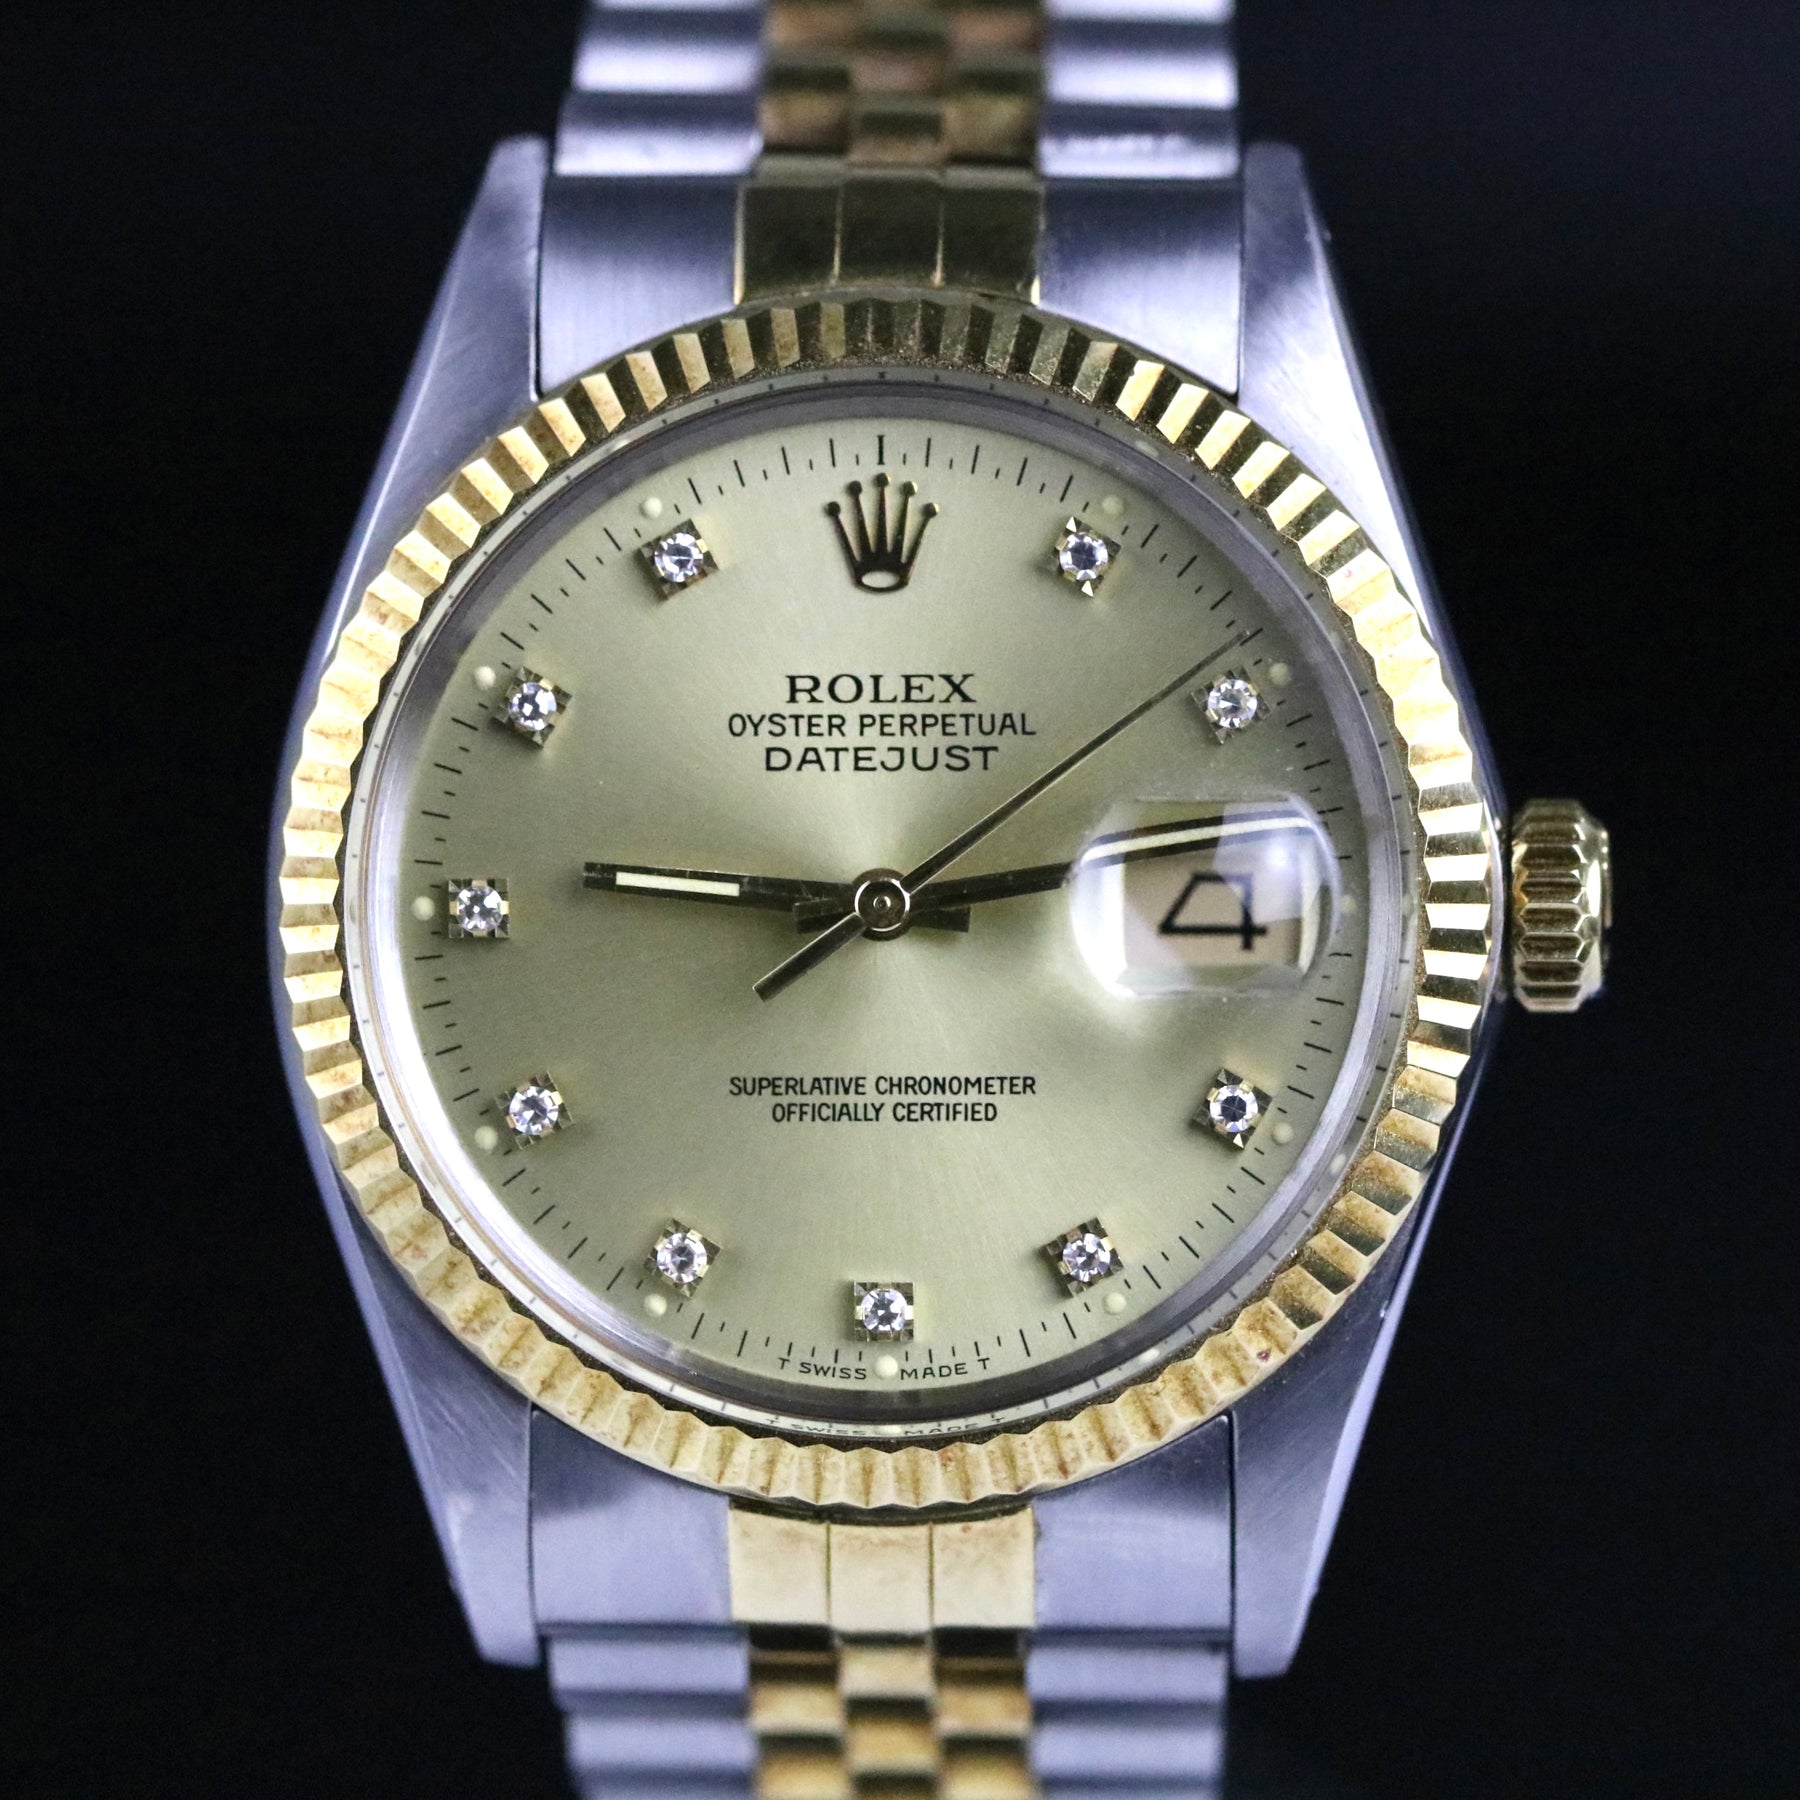 1986 Rolex 16013 Datejust 36mm Tight Bracelet Factory Diamond Dial with Box & Papers